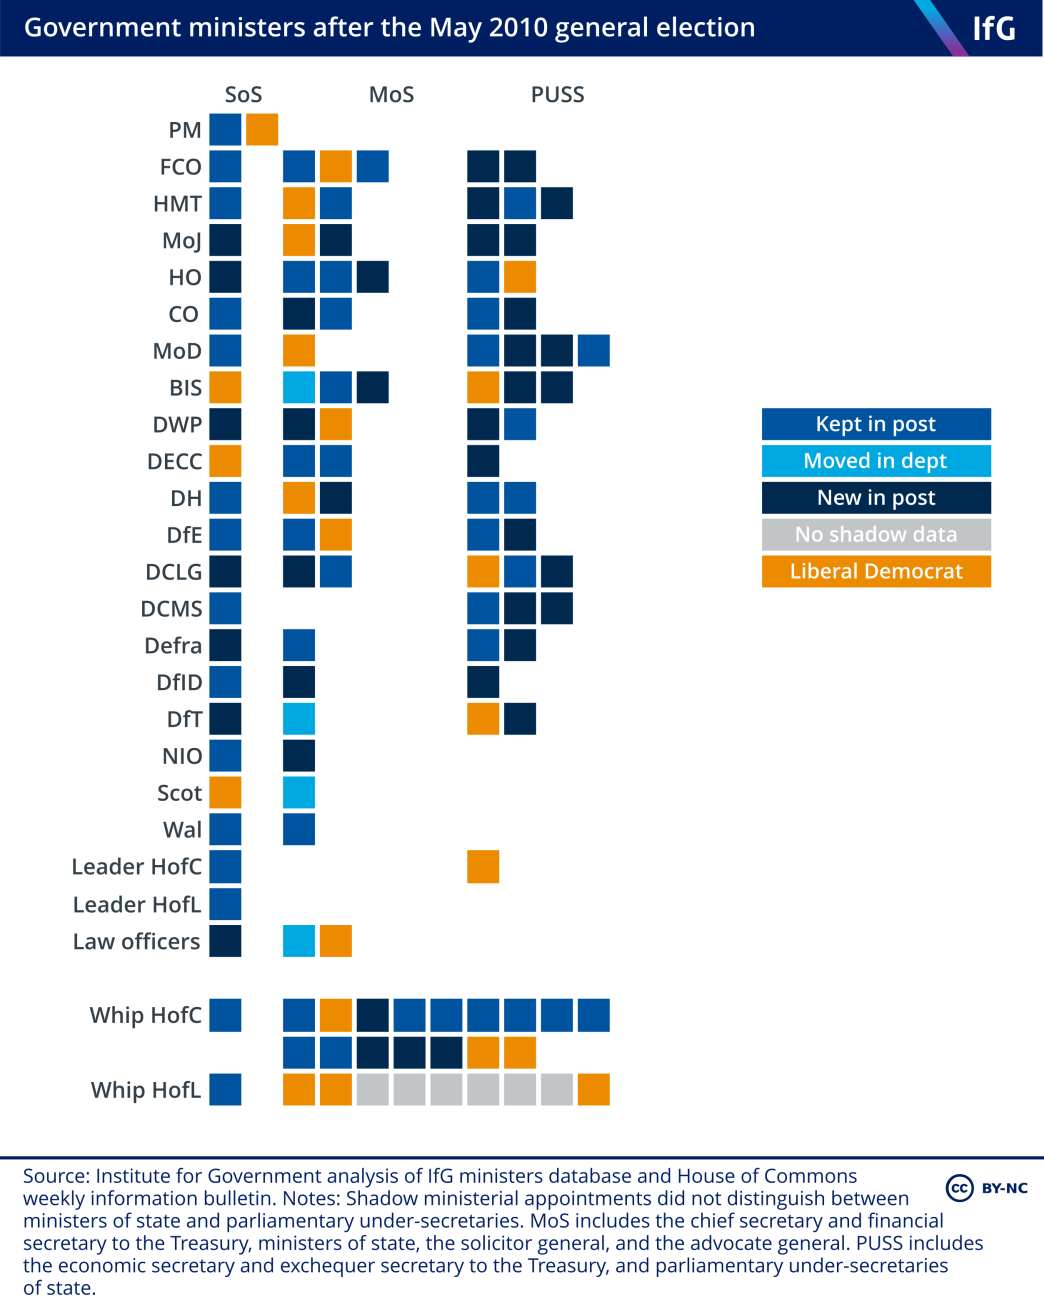 A waffle chart showing coalition government ministers after the 2010 general election. It shows which secretaries of state, ministers of state and parliamentary under secretaries were kept in post, moved department, new in post, or a Liberal Democrat minister.